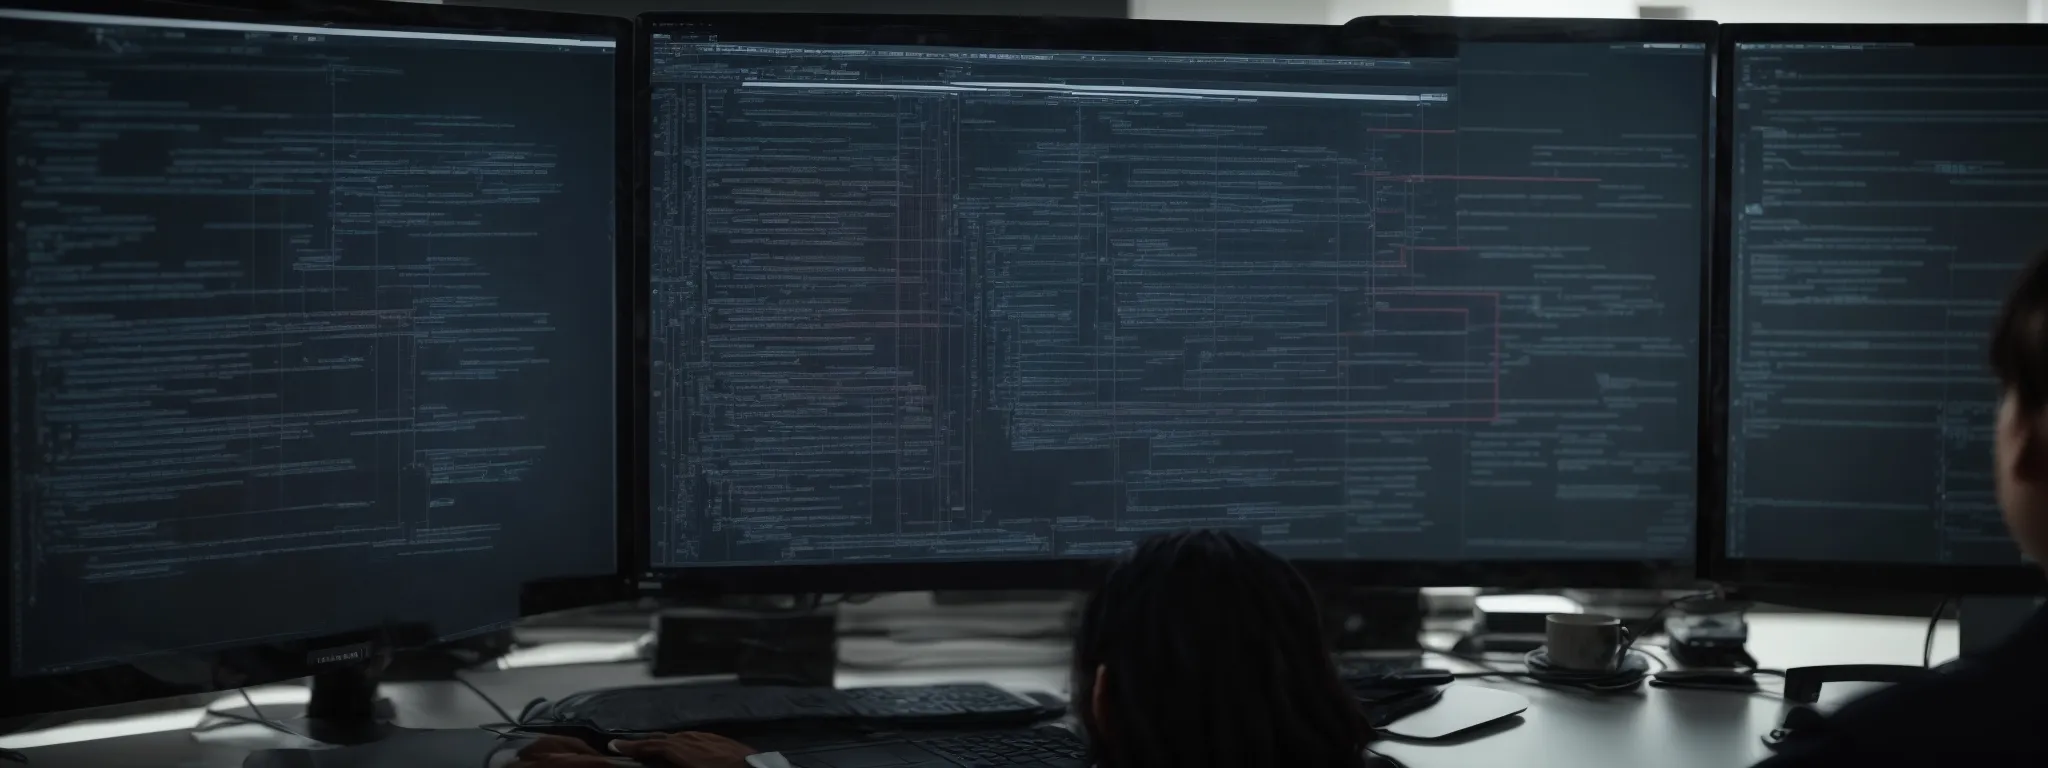 a web developer monitors a computer screen displaying a complex flowchart representing a website's hierarchical structure.